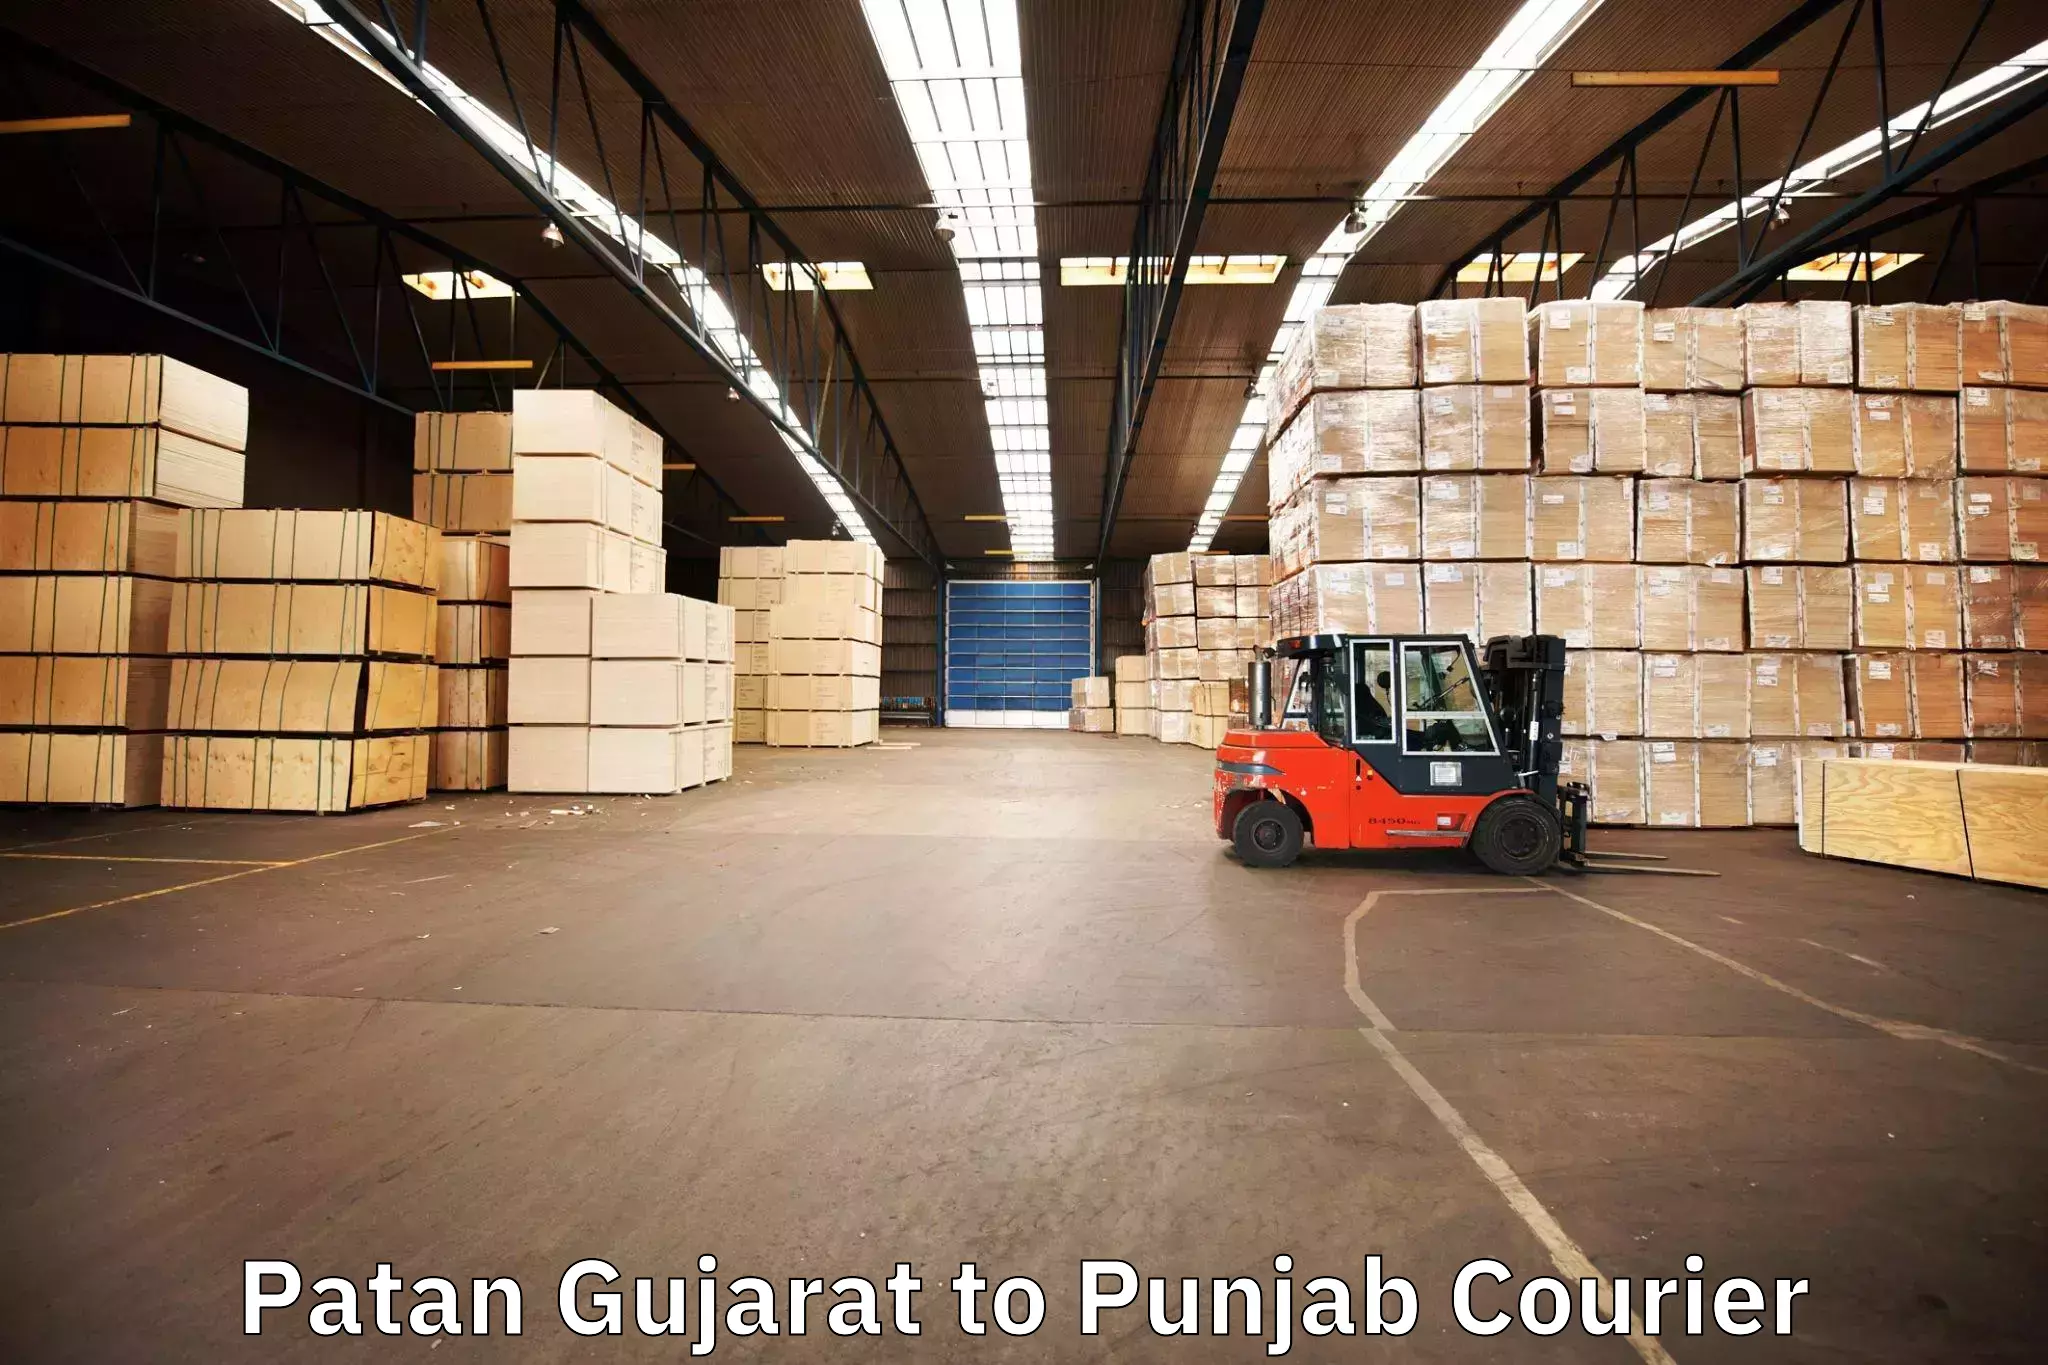 Trusted relocation experts Patan Gujarat to Malout